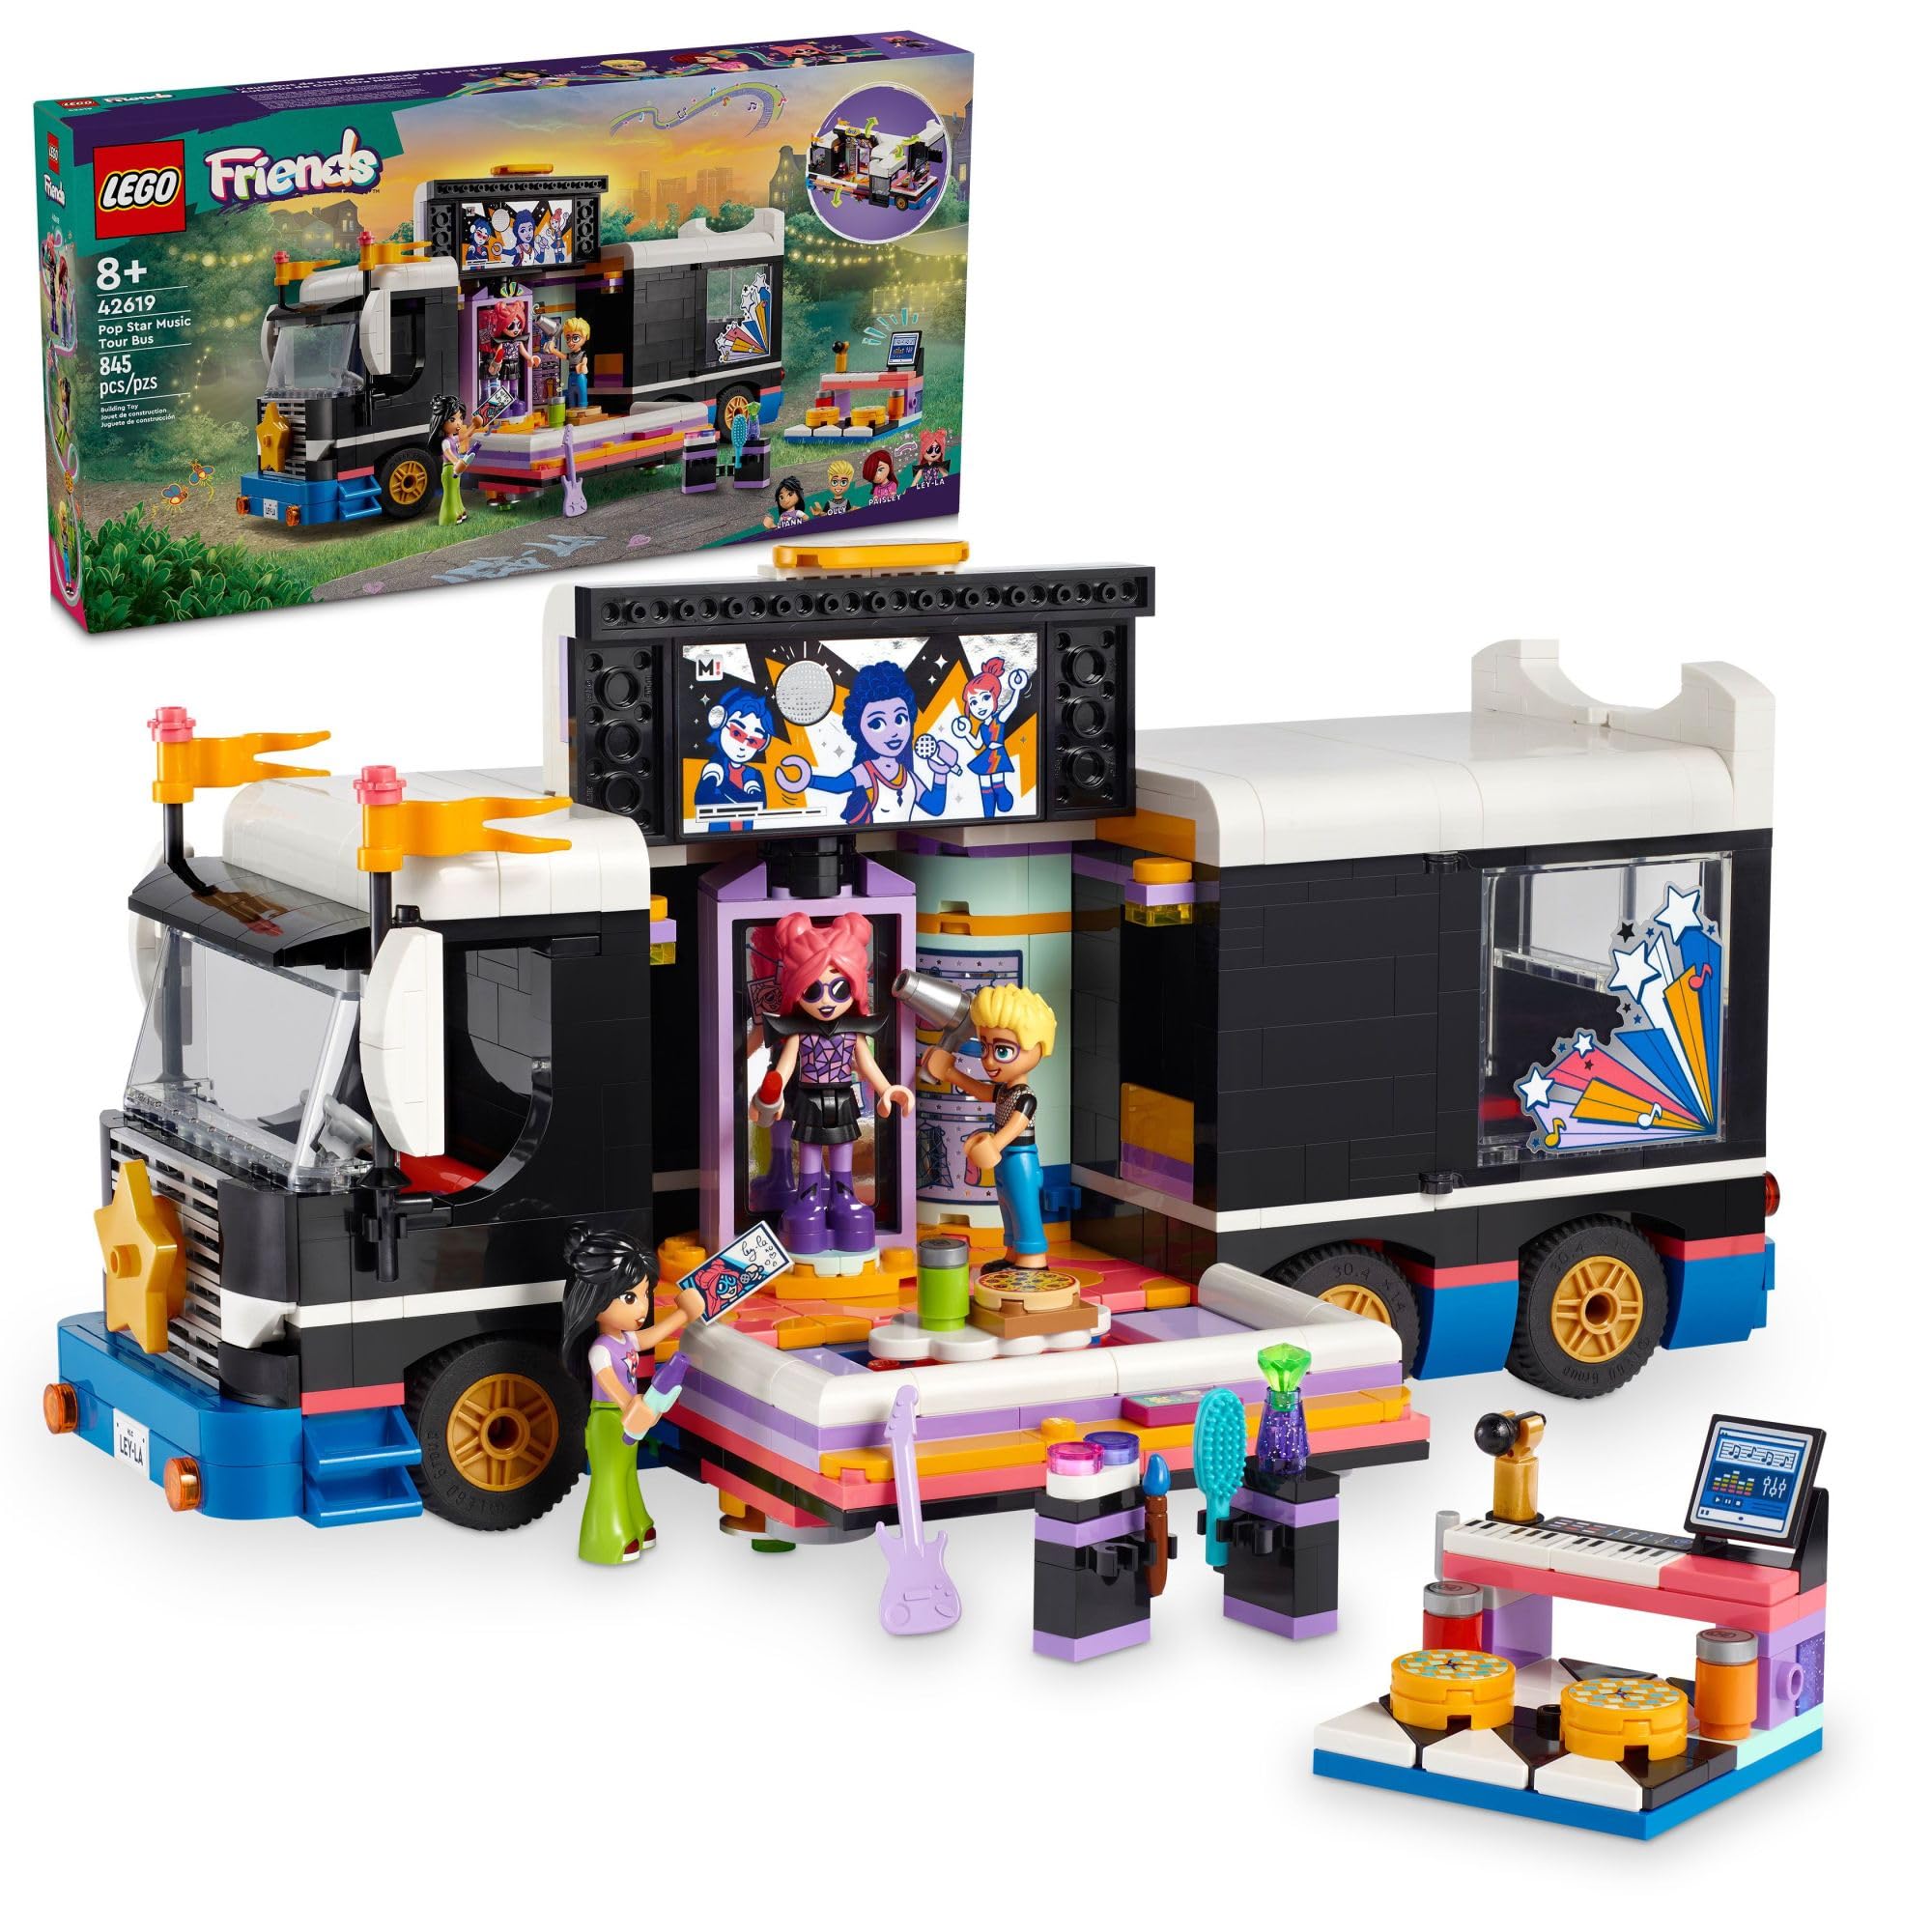 LEGO Friends Pop Star Music Tour Bus Play Together​ Toy, Social-Emotional Musical Toy with 4 Mini-Doll Characters, Toy Truck Building Kit, Music Gift for 8 Year Old Kids, Girls and Boys, 42619